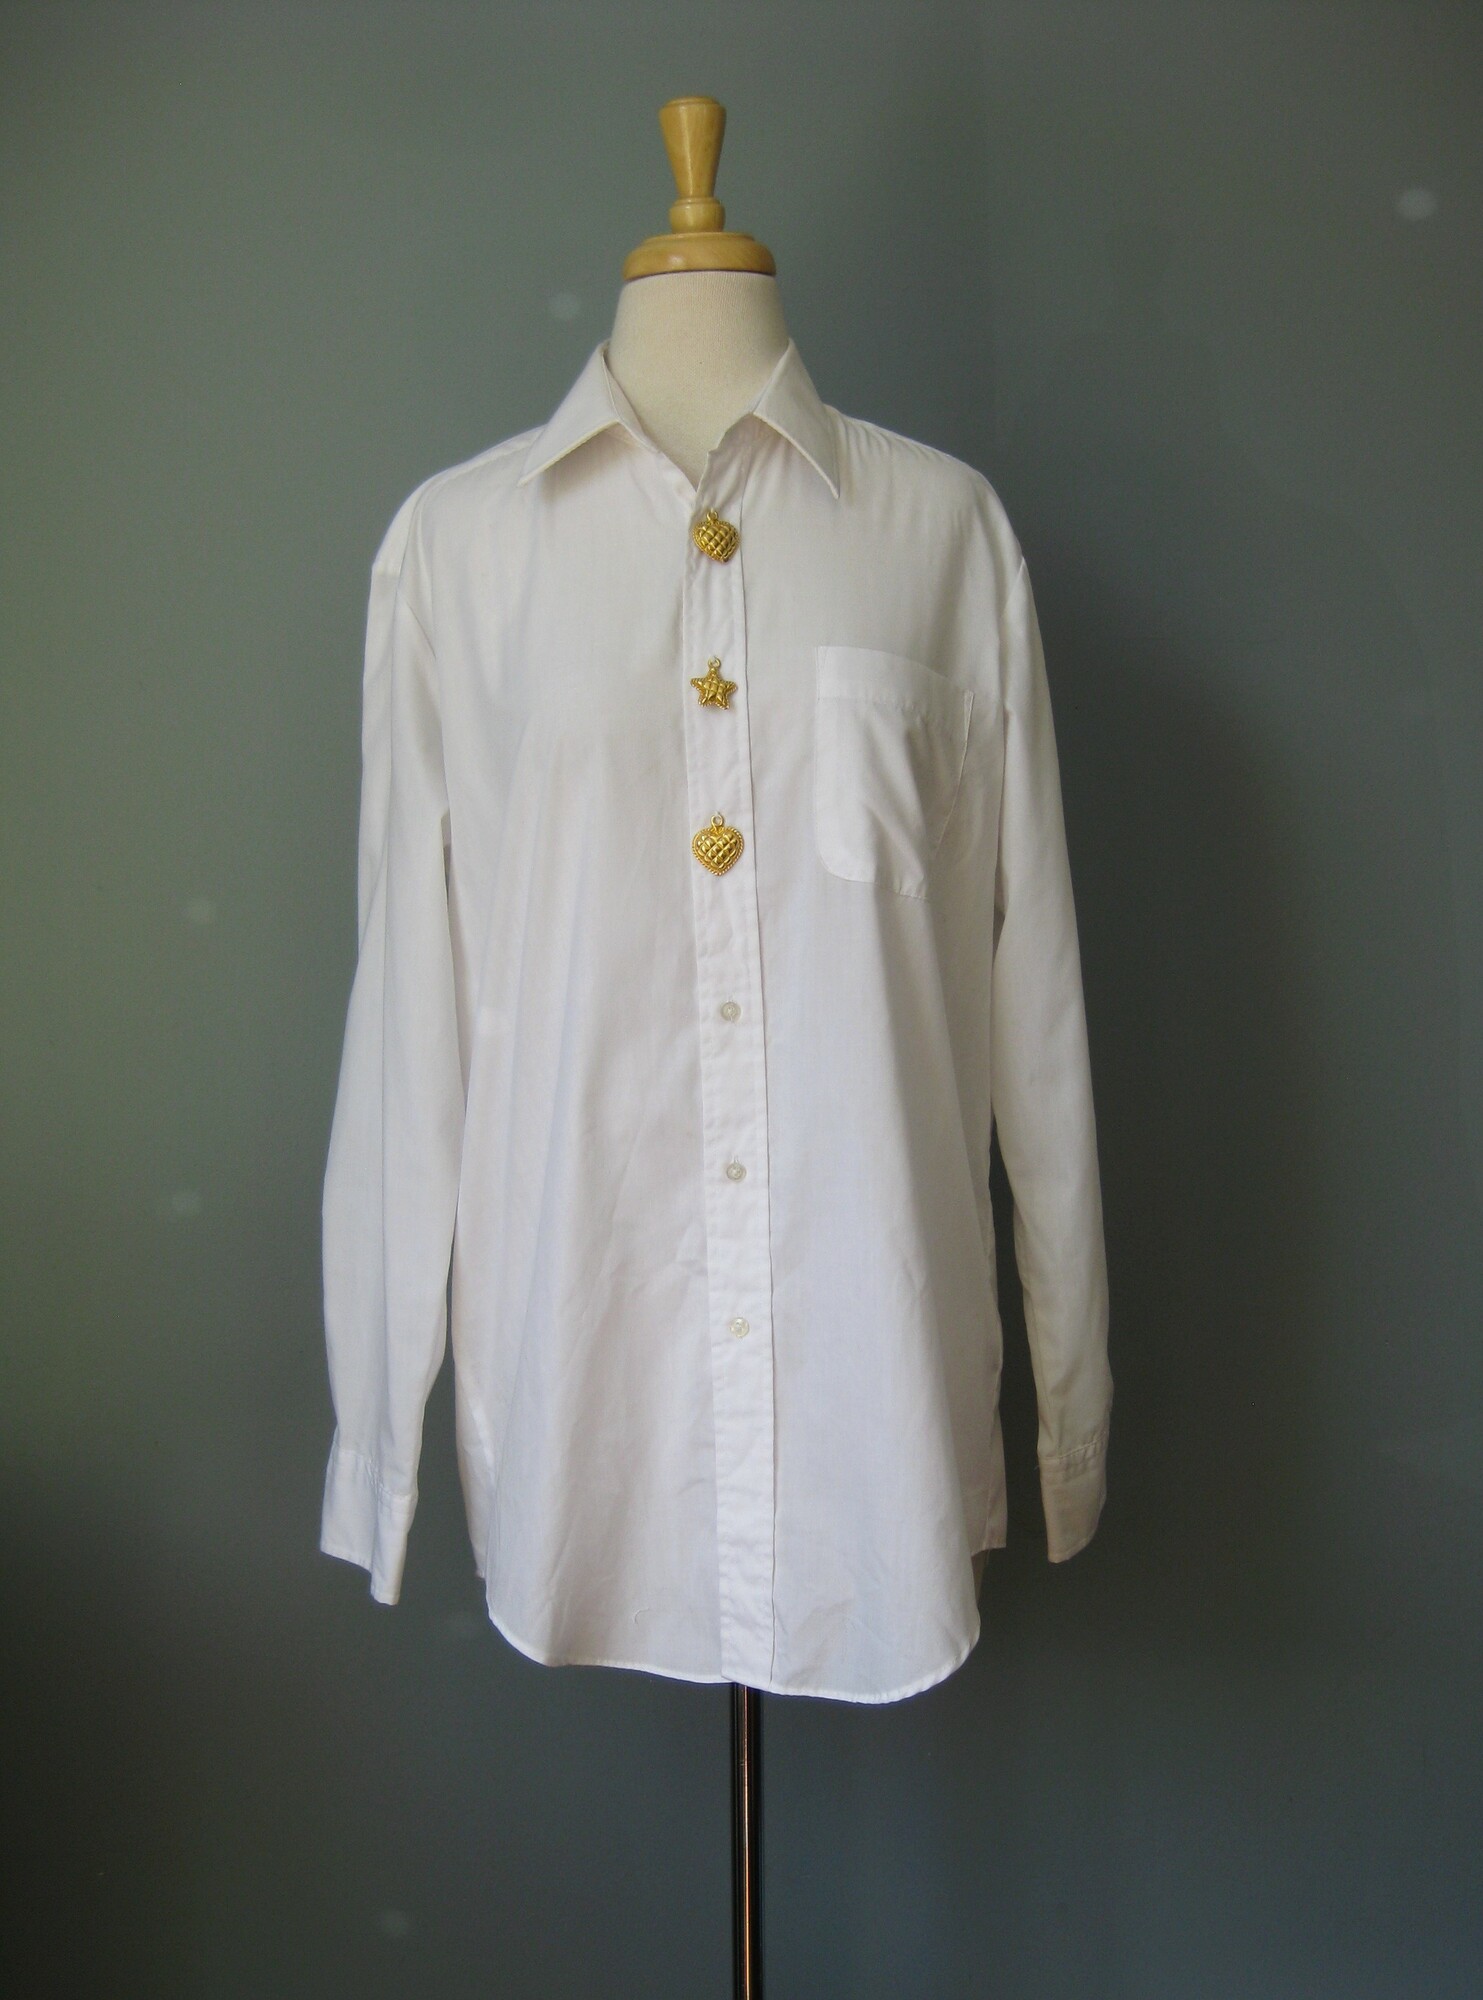 Vtg Cache, Wh/Gold, Size: Medium

This is a fun white blouse with a little something extra.
By Cache ( Gold Label!)
White cotton poly blend
Embellished with three substantial gold tone metal charms on the button placket.
Two hearts and a star in the middle.
Made in Korea
Marked size M
Flat measurements:
shoulder to shoulder: 16.5
armpit to armpit: 22.5
width at hem: 21.75
underarm sleeve seam length: 19
length : 31.5
Excellent condition!

thanks for looking
#43165